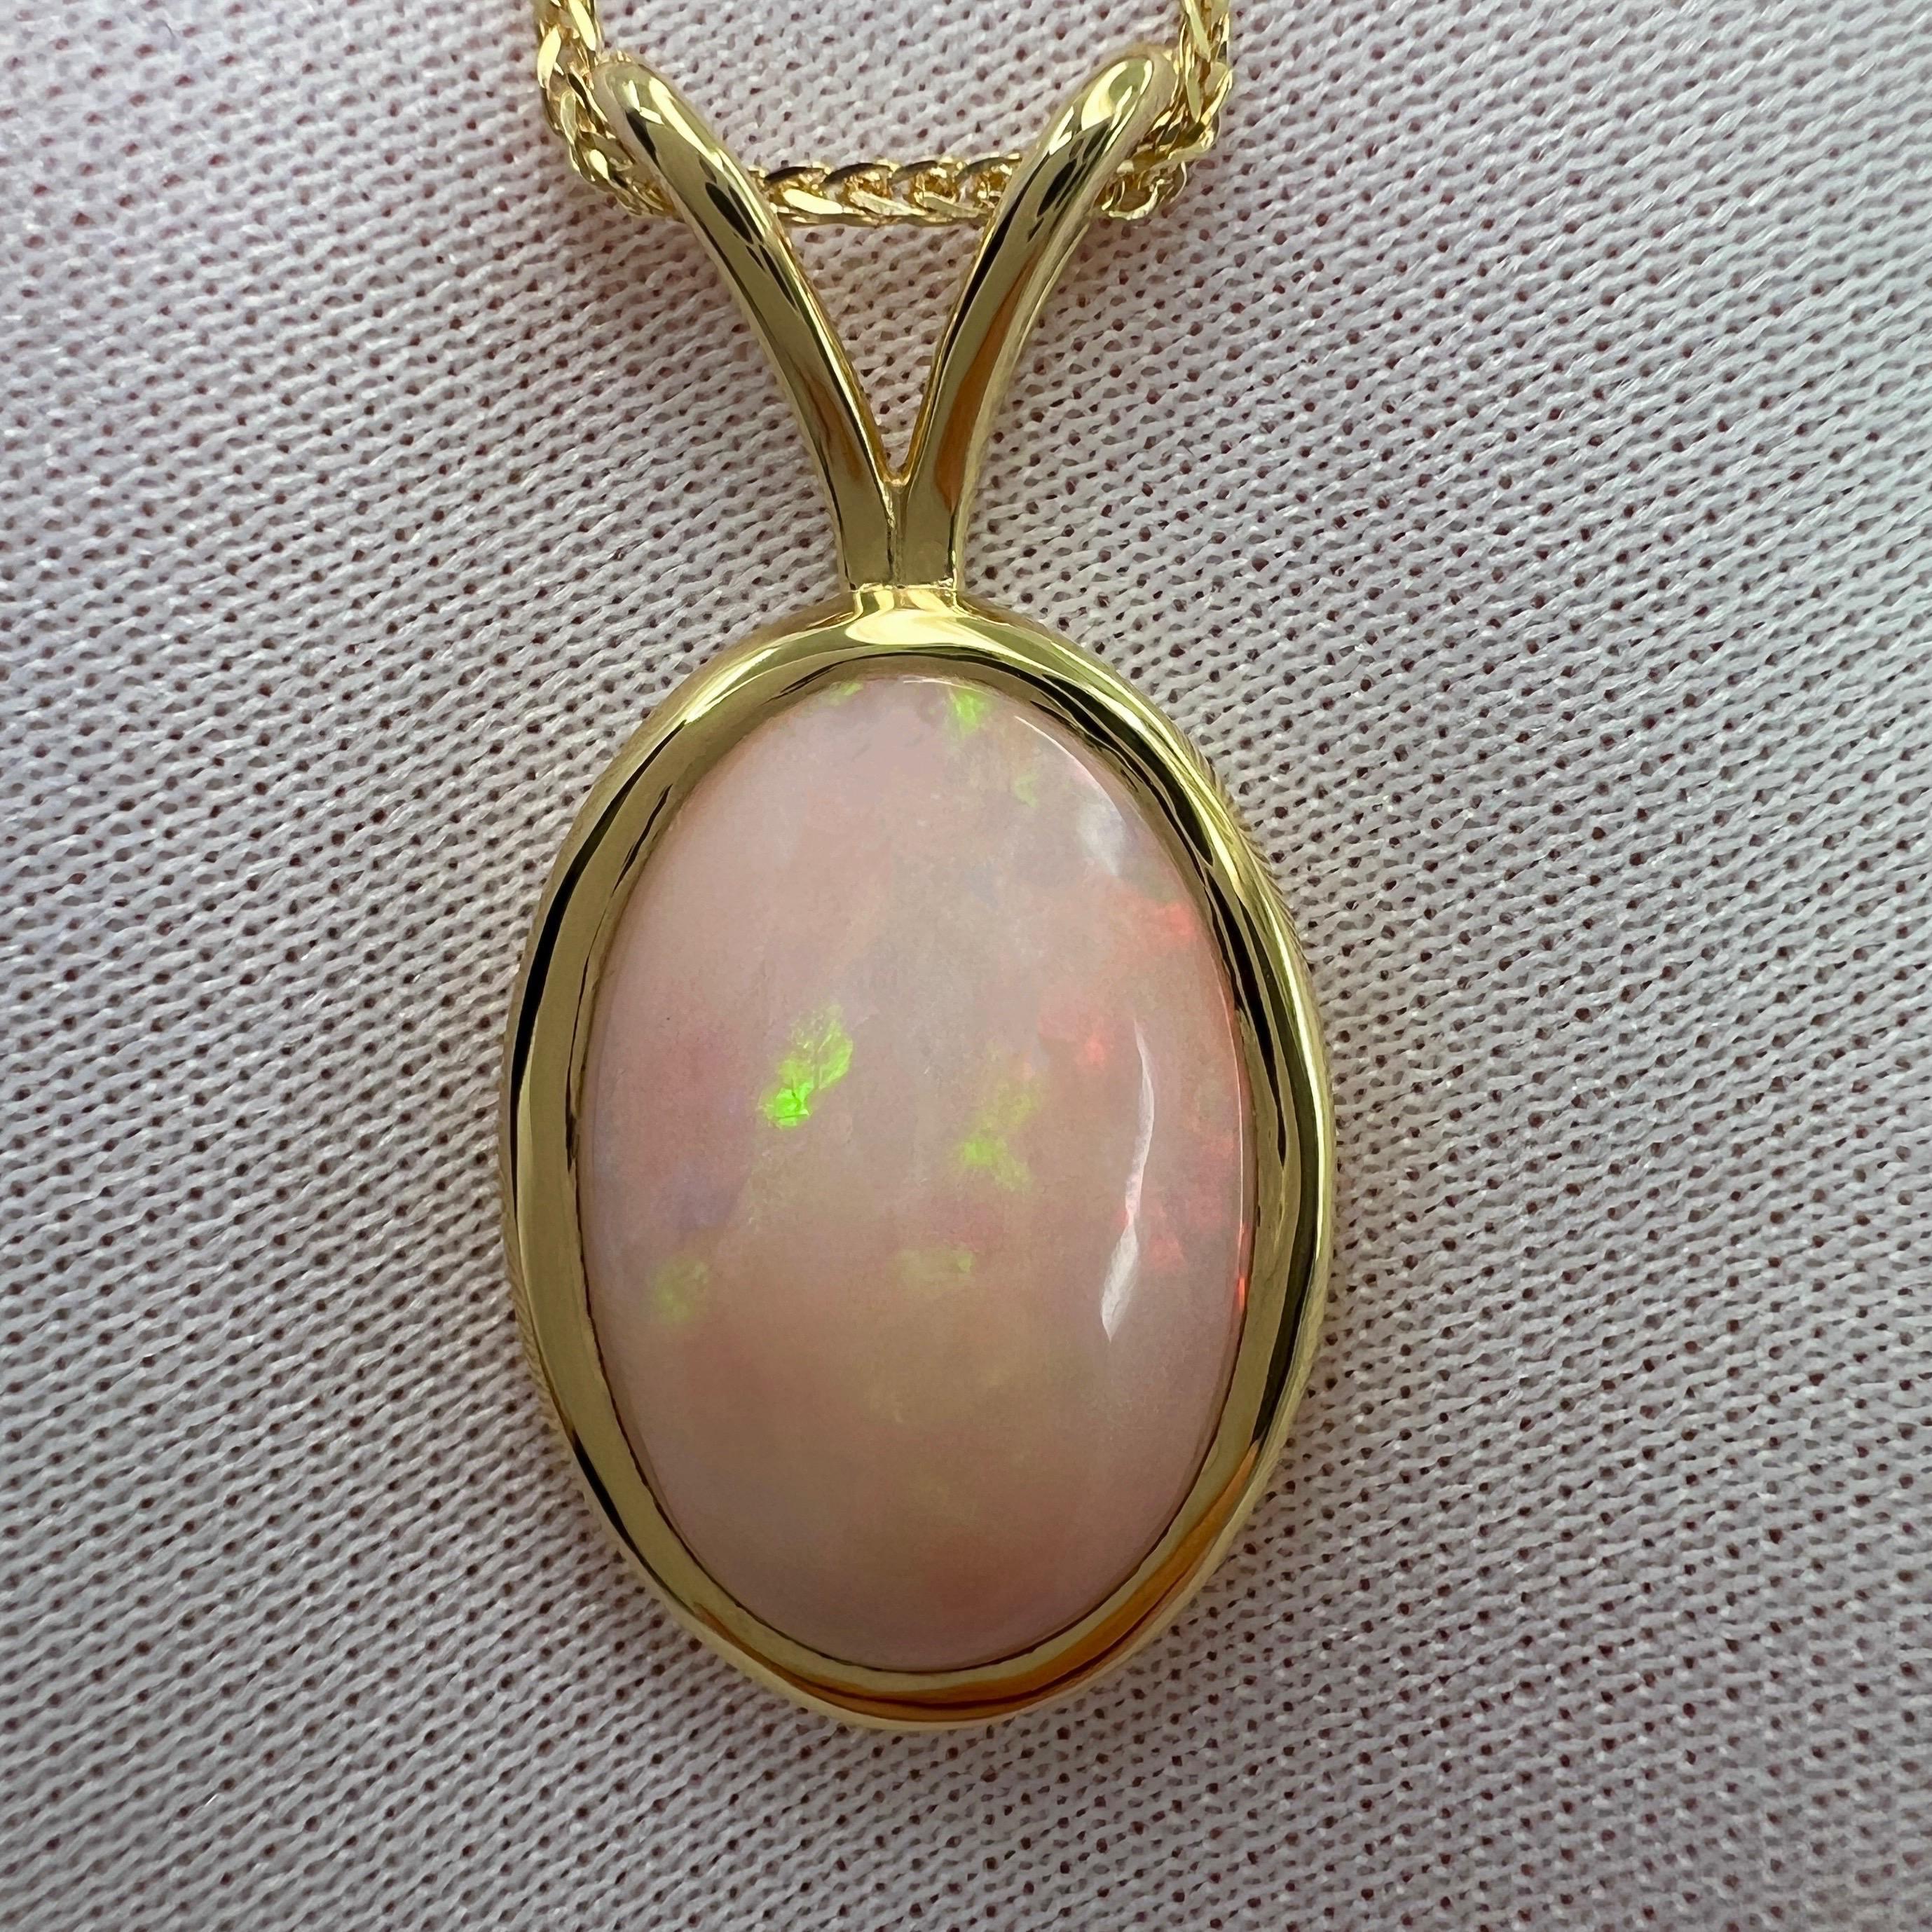 6.15ct Fine White Opal Oval Cabochon 18k Yellow Gold Bezel Pendant Necklace For Sale 1